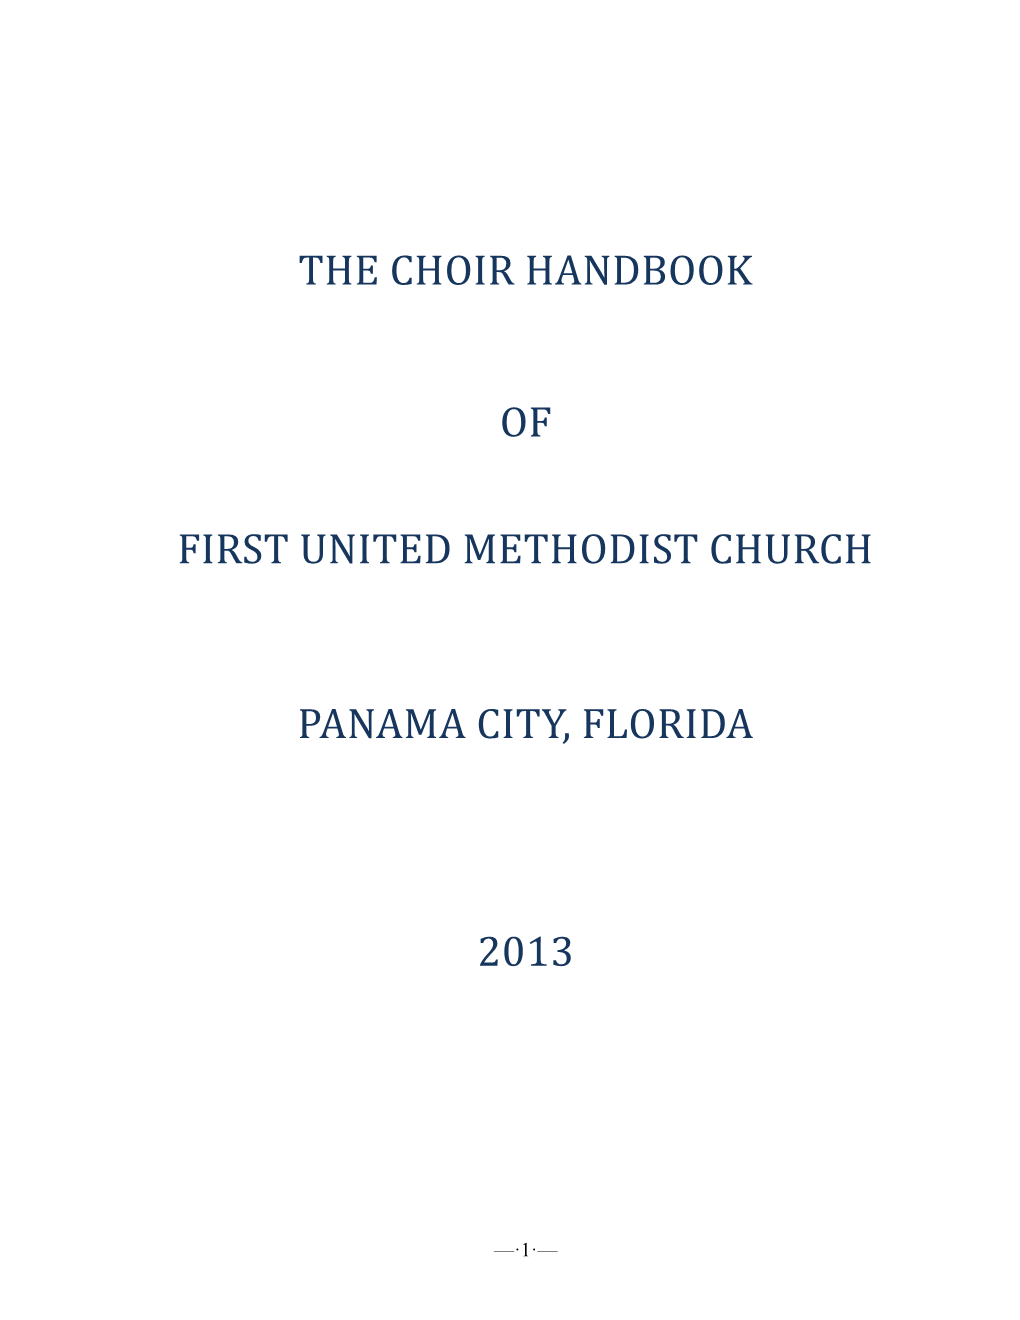 Section 1 About the Choir